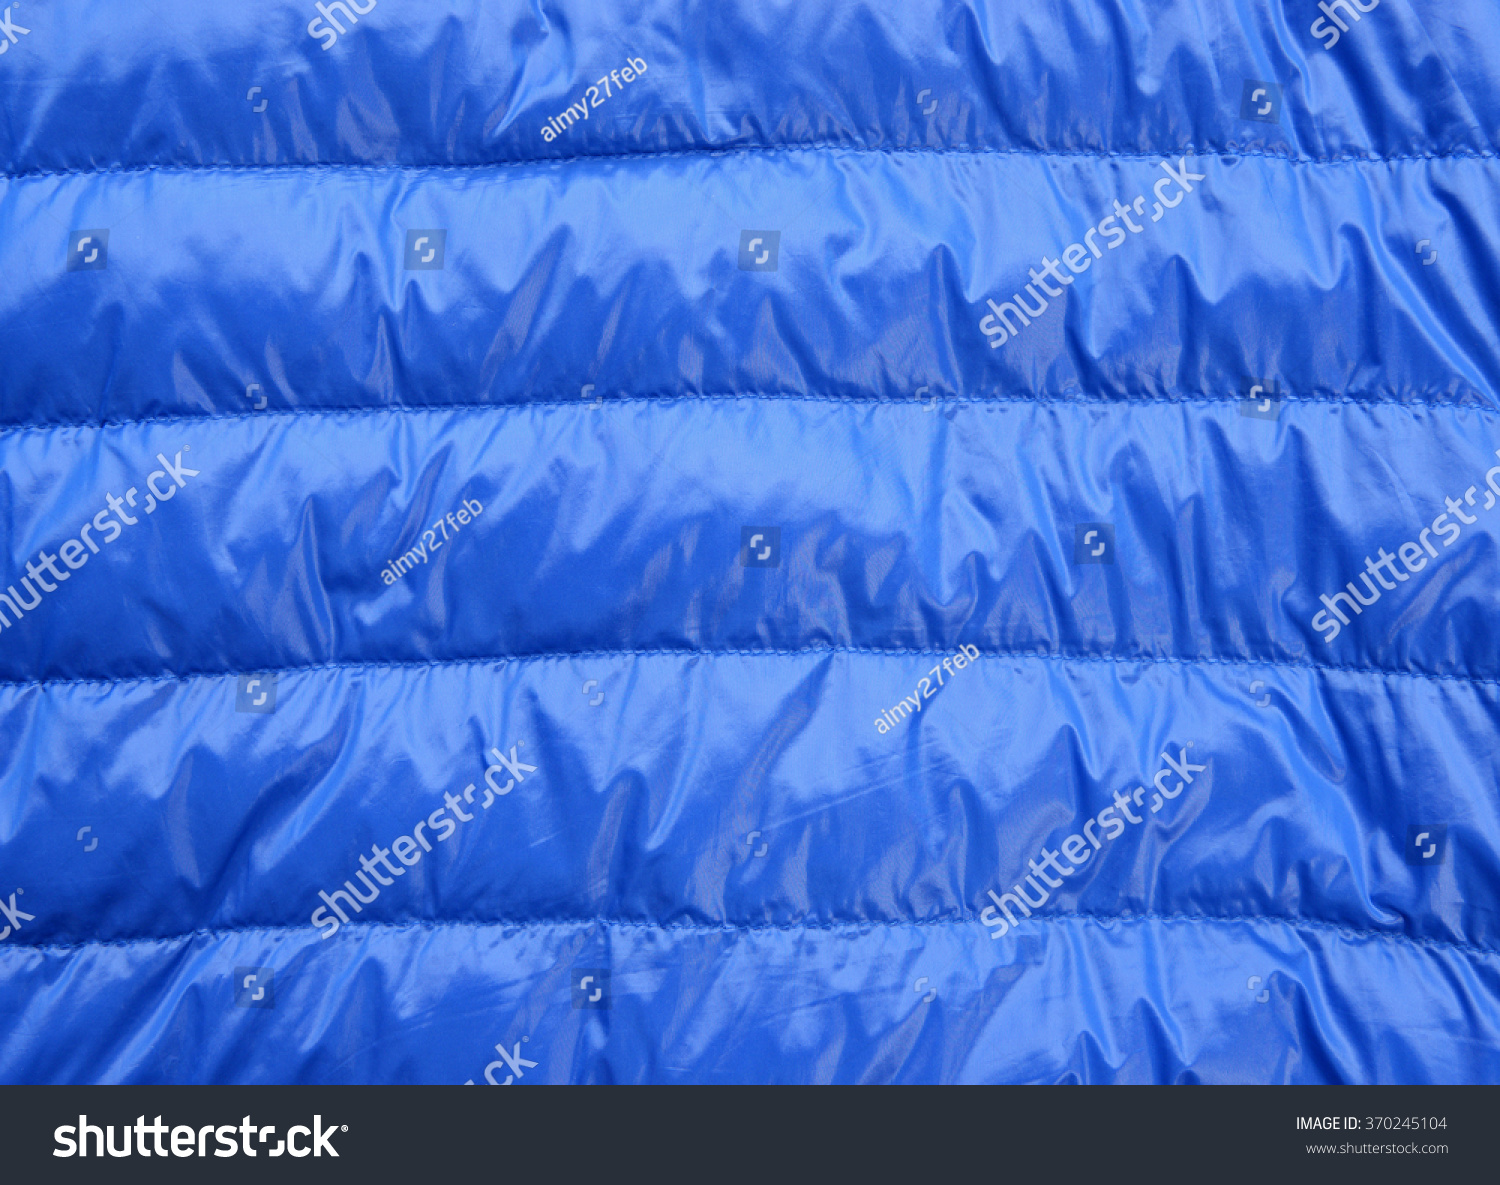 Down Jacket Material Background Stock Photo 370245104 : Shutterstock